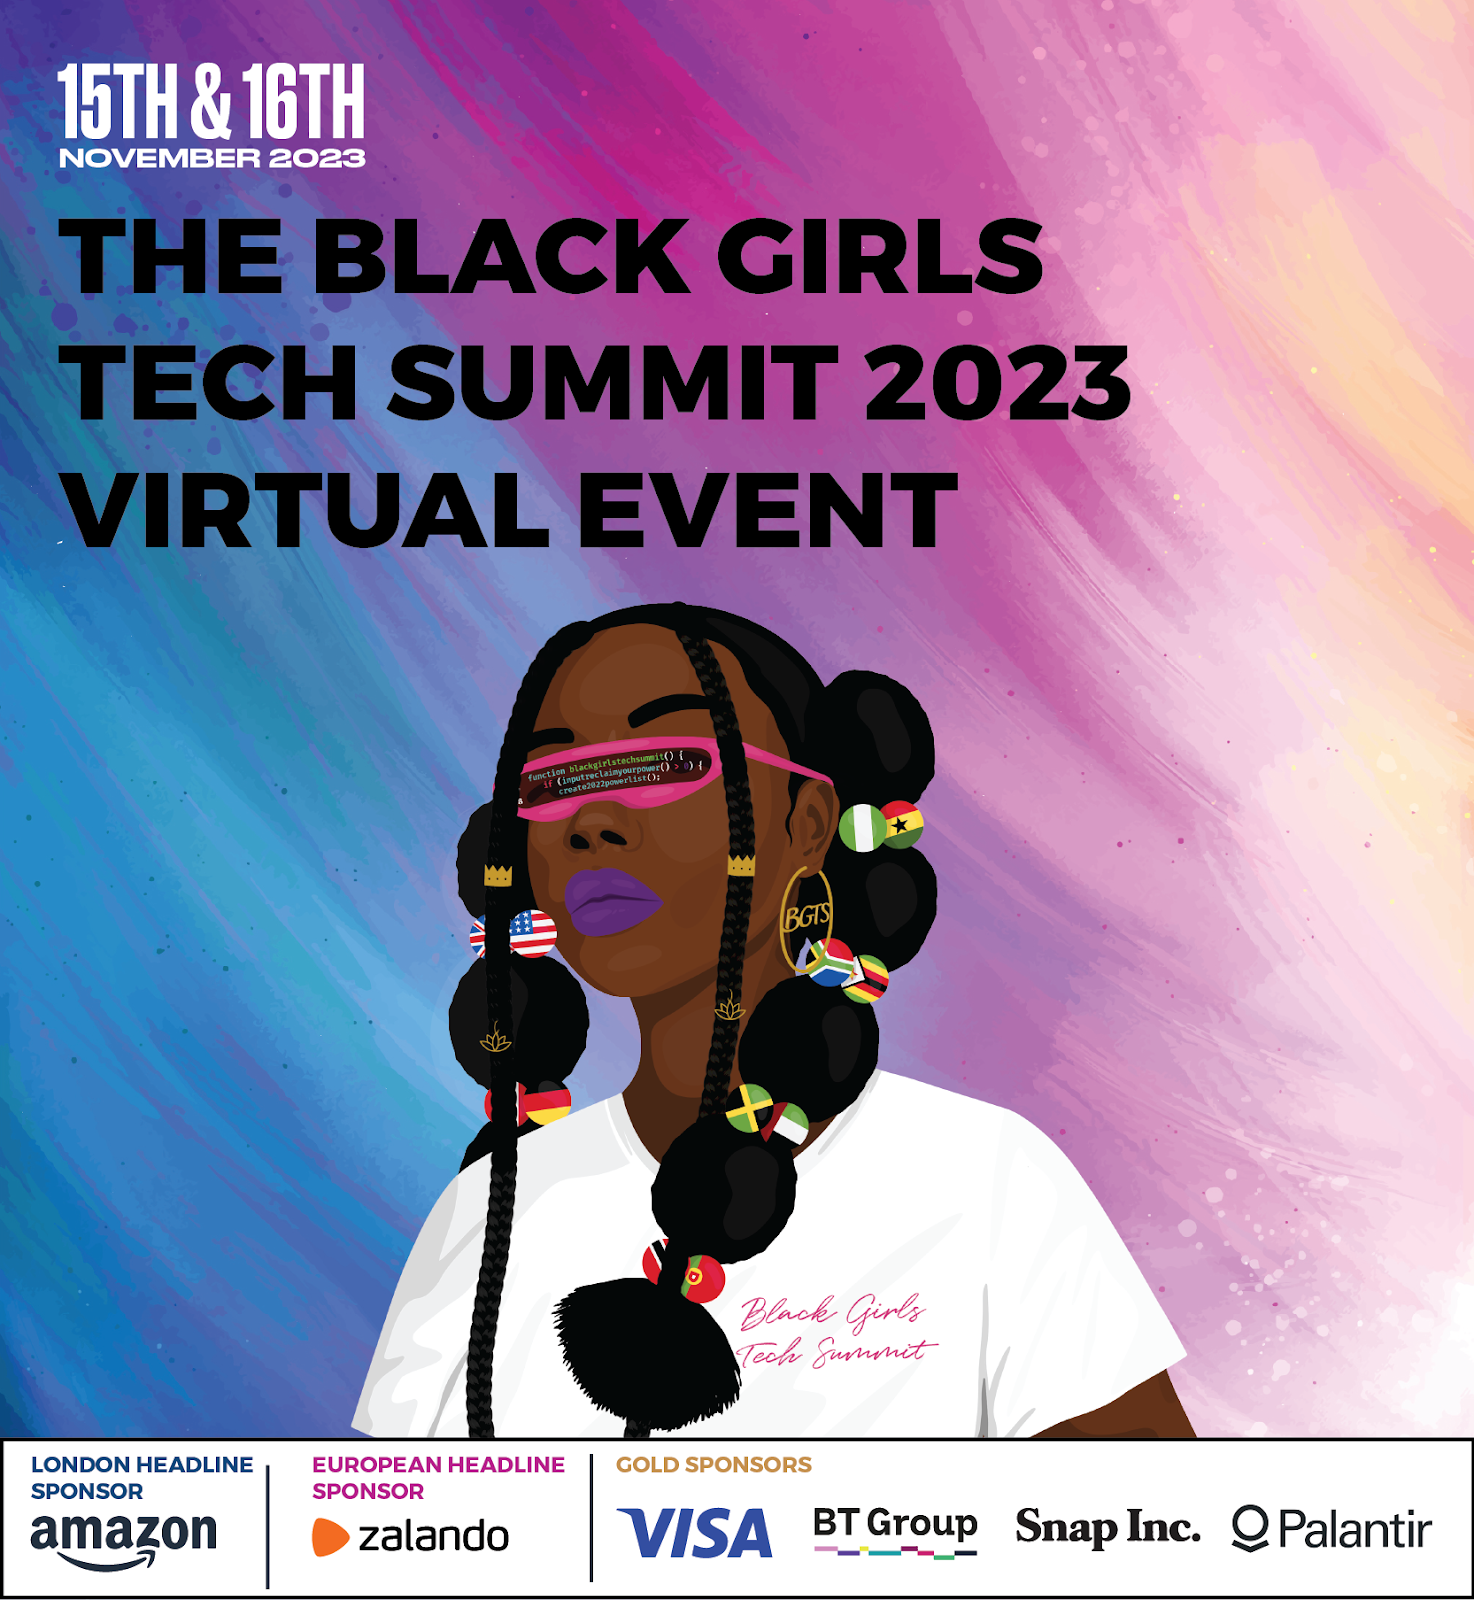 And ad for Black Girls in Tech Summit 2023